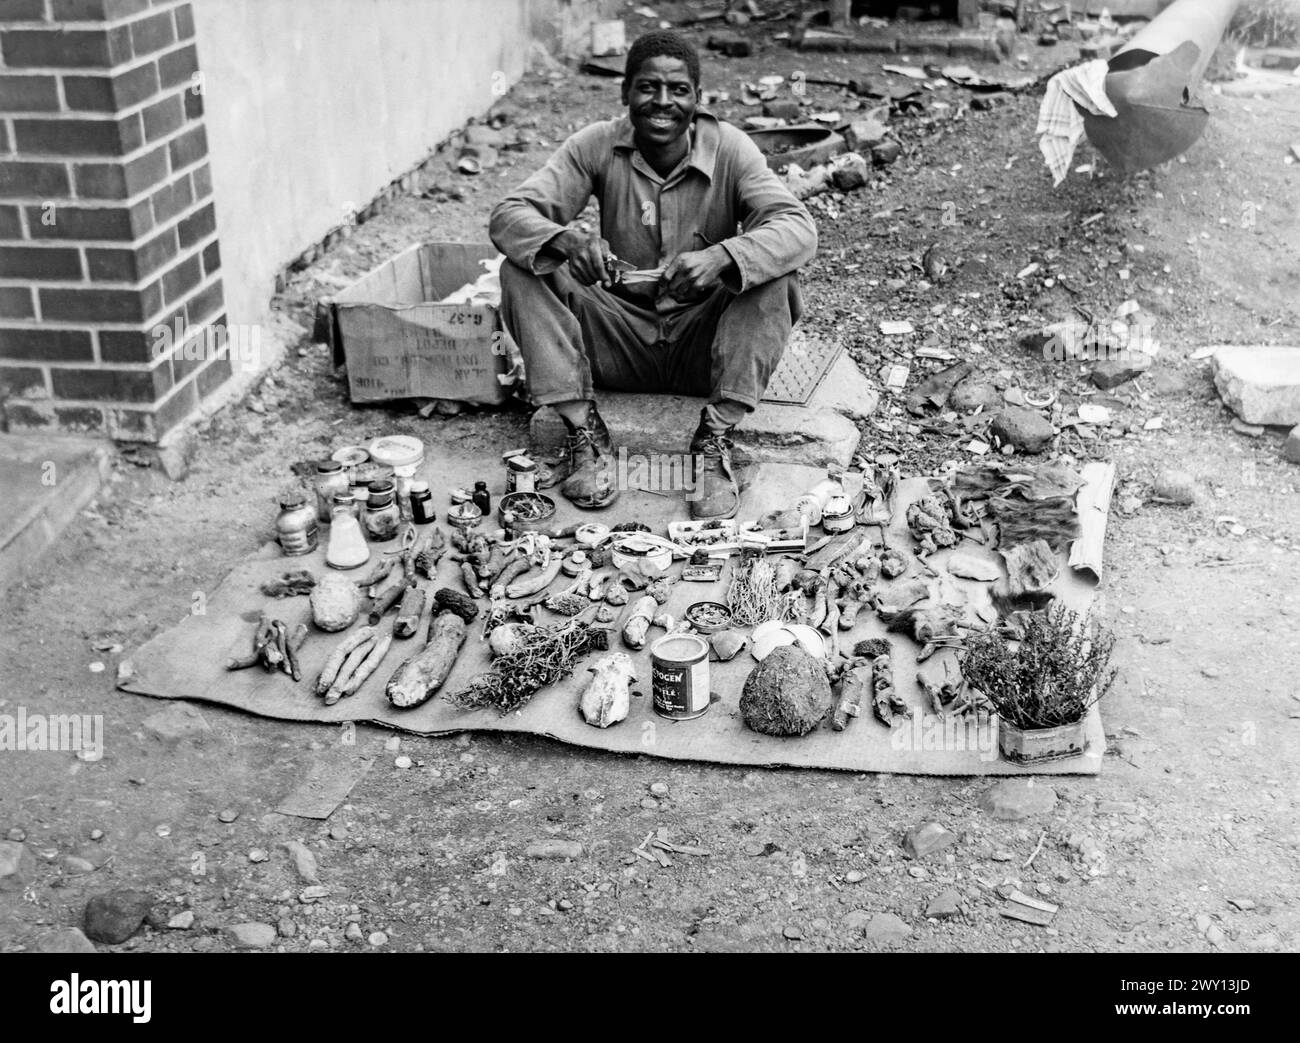 Man in the street selling an assortment of roots, herbs and other things in/near Ndola, Northern Rhodesia (now Zambia) c1956 Stock Photo